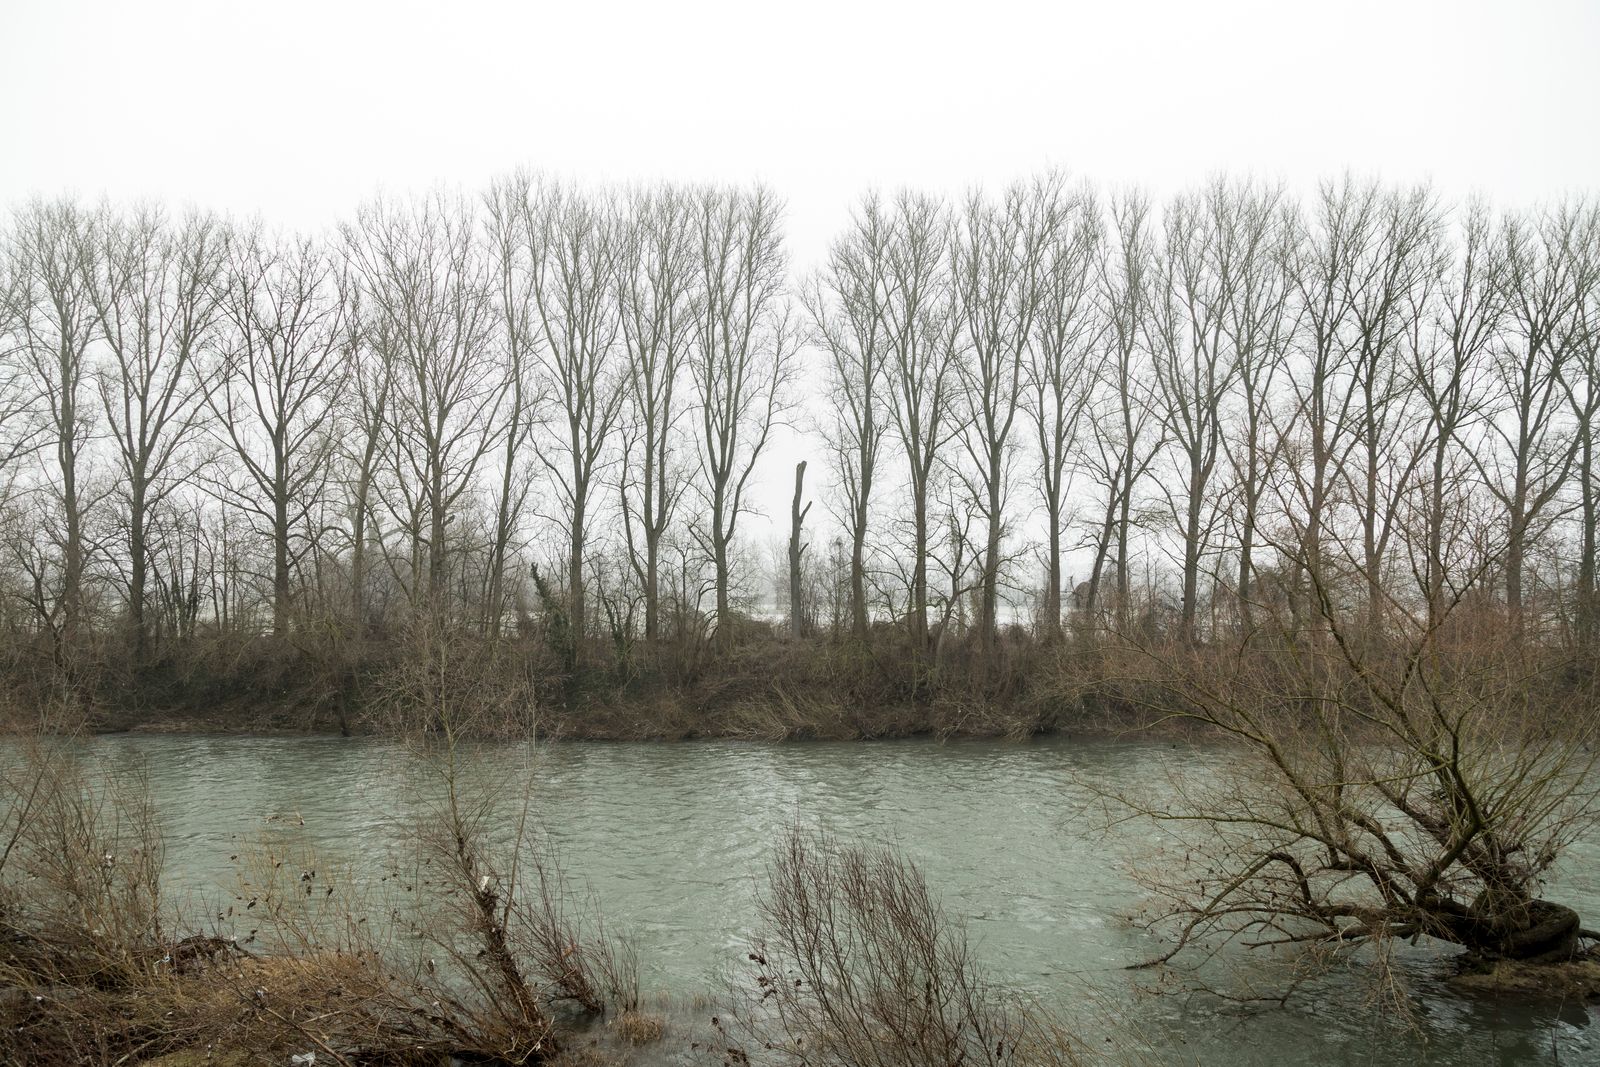 © Davide Bertuccio - Image from the Across the river's flow photography project